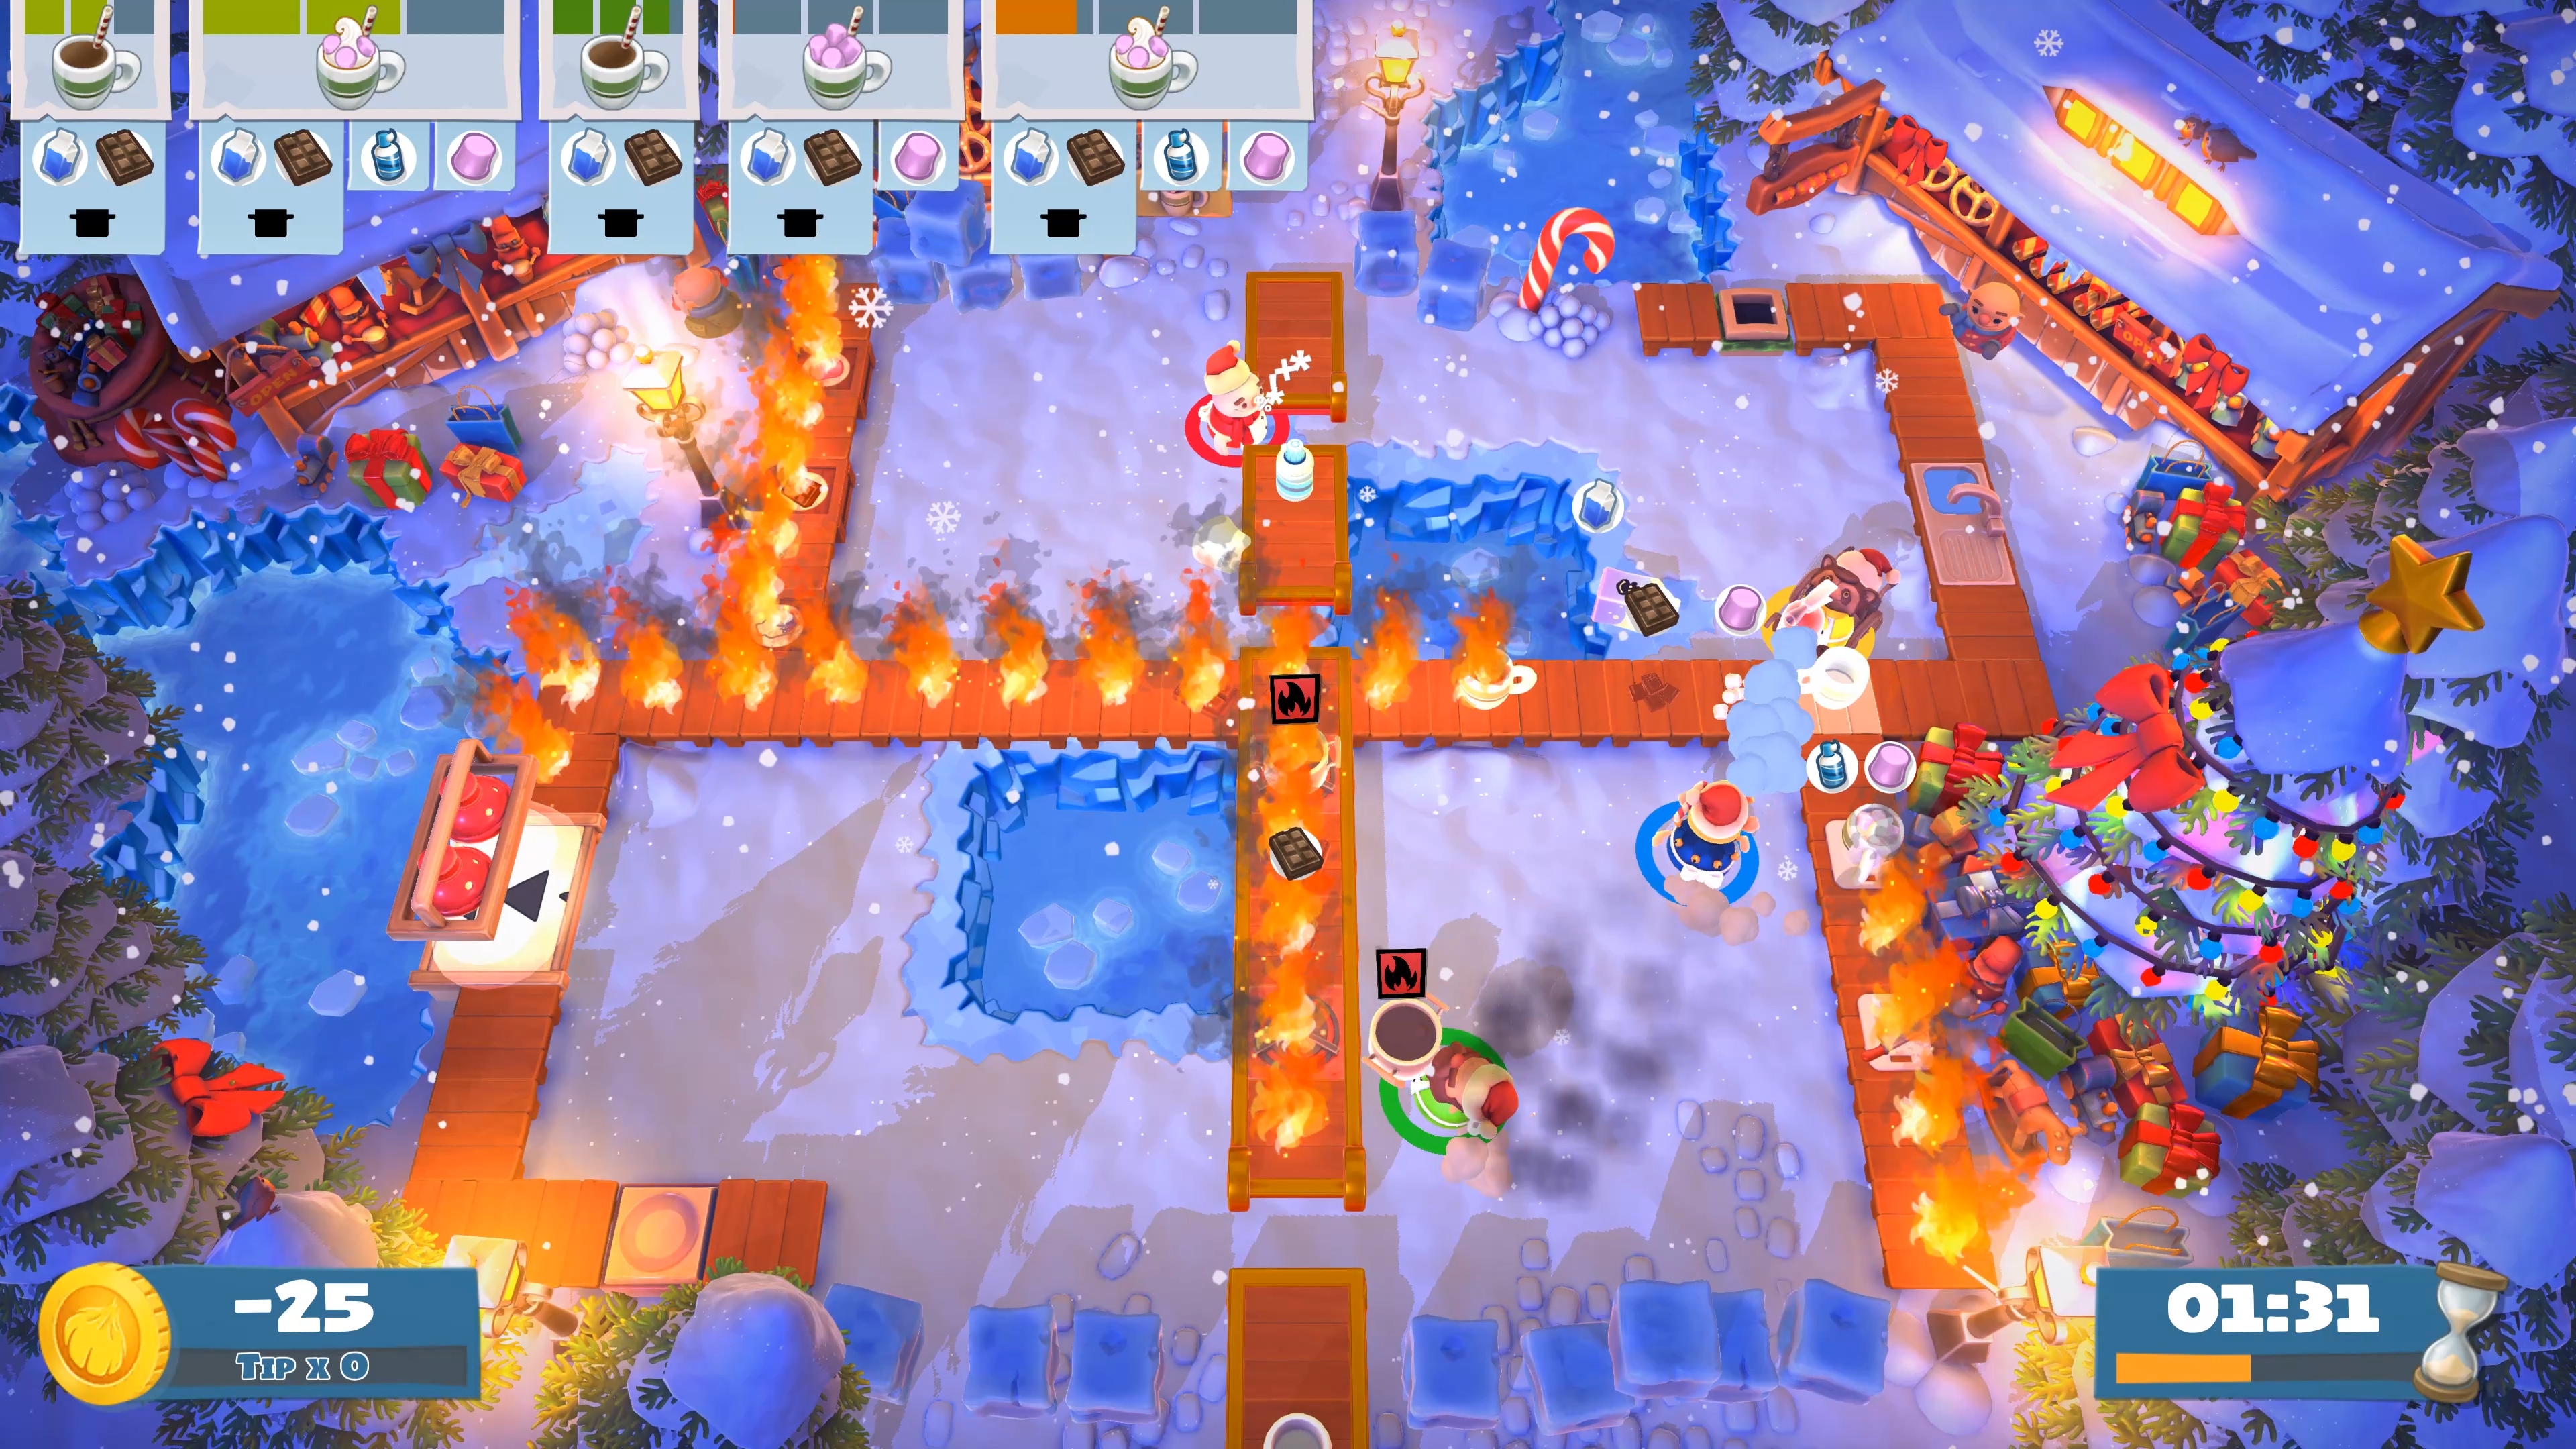 Overcooked 2 Free Holiday Update Dec 2018 #8